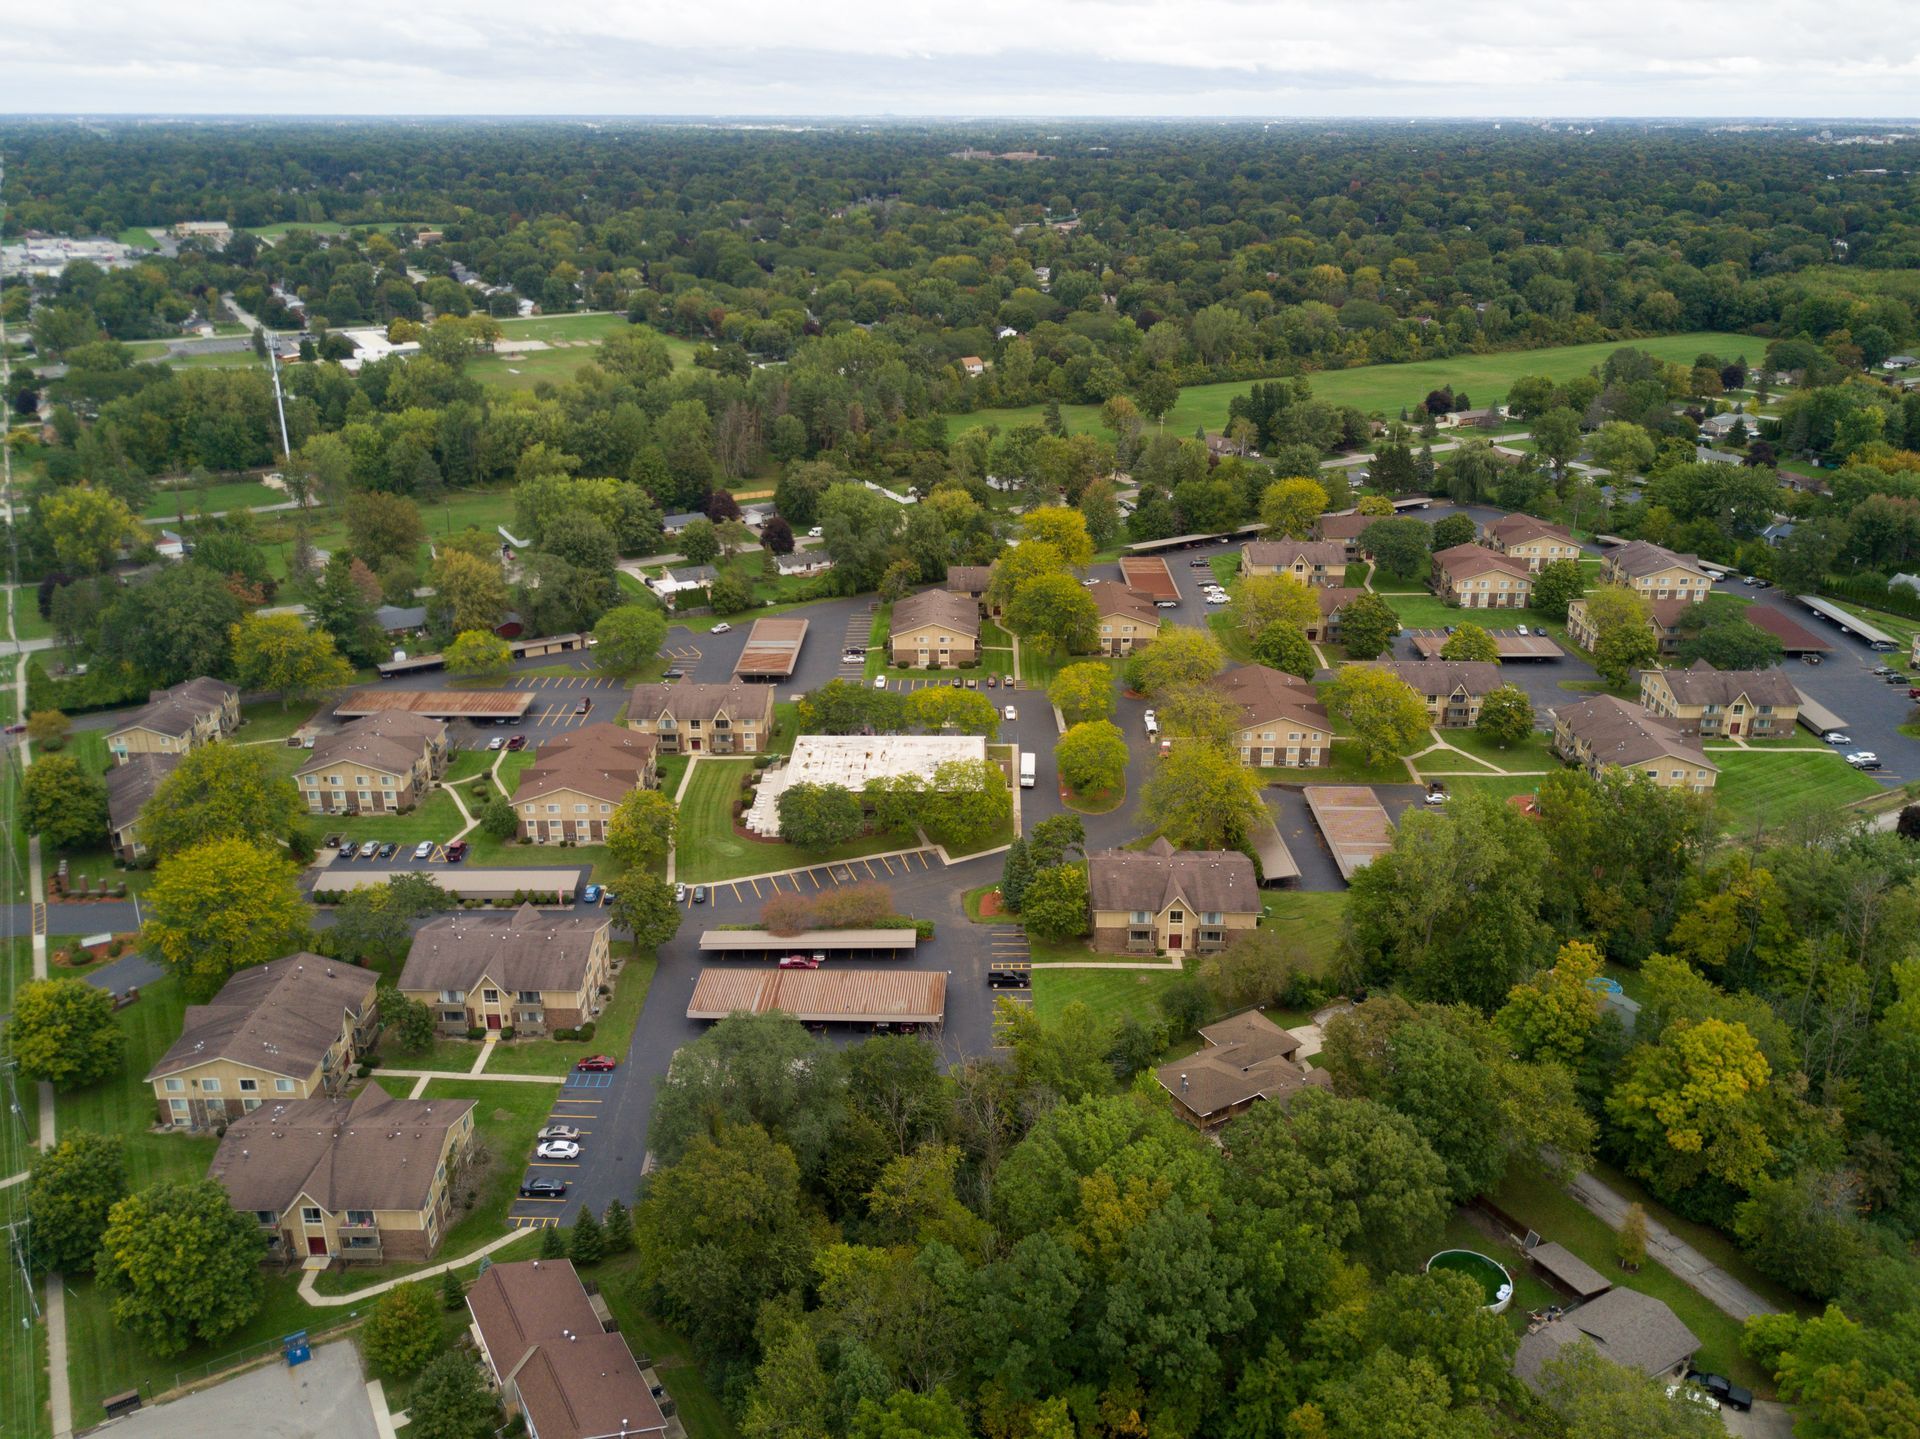 An aerial view of a residential area with lots of trees and houses.